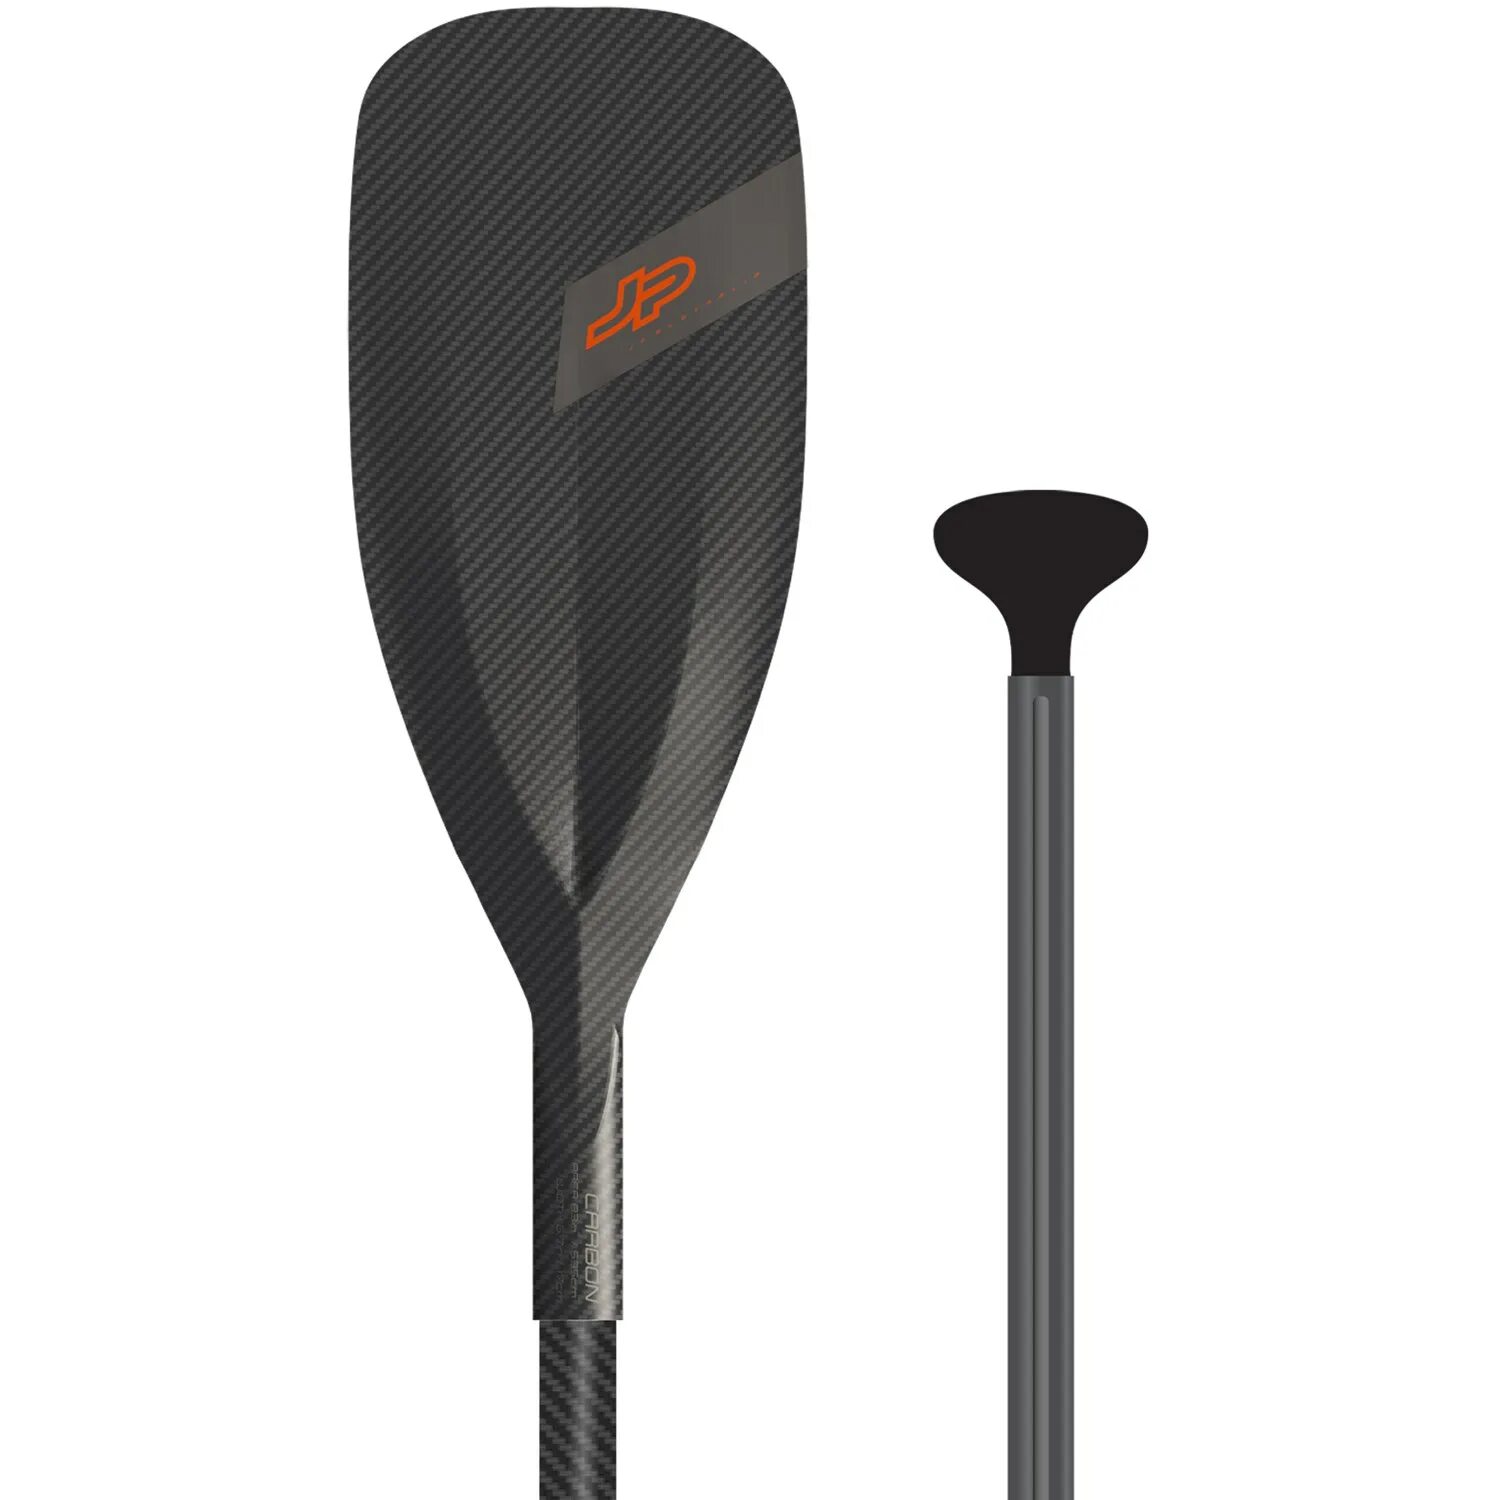 Паддл крик. Весло jp-Australia 23 Carbon Pro Paddle. Весло jp-Australia 23 Carbon Pro Paddle CTL 90. Весло для sup карбон. Весло Red Paddle Ultimate Carbon fixed.